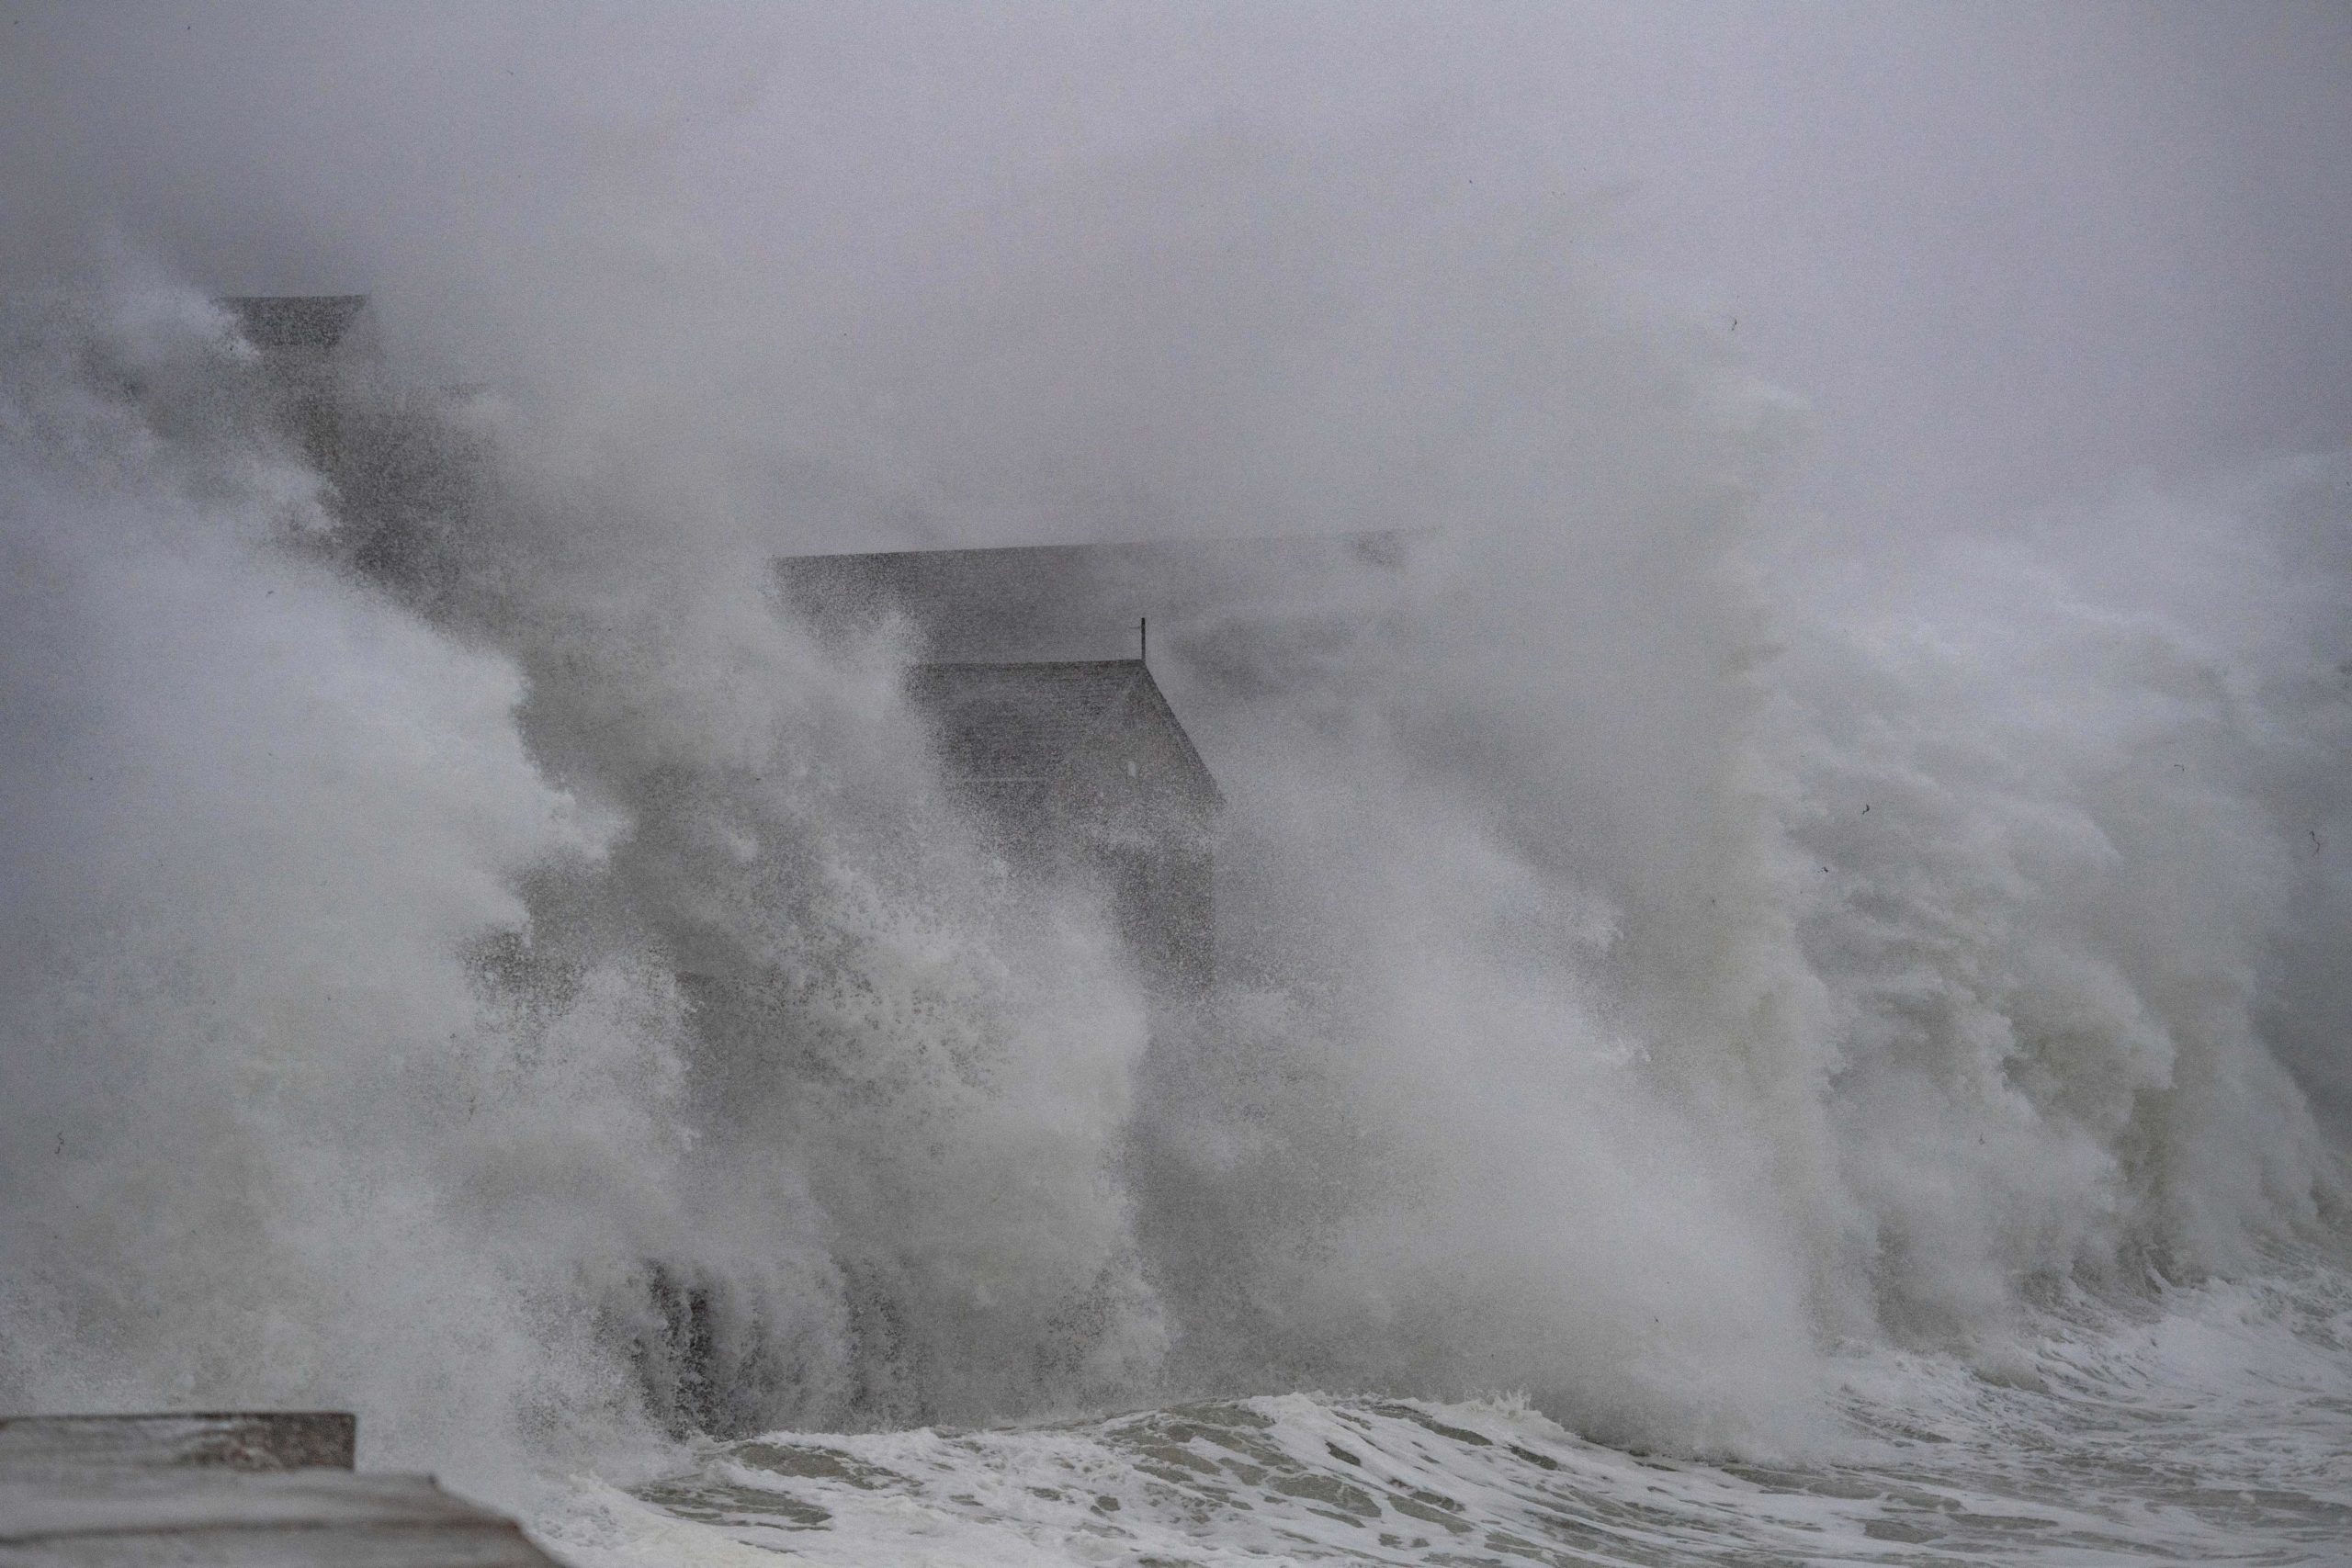 Waves crash over oceanfront homes during a noreaster in Scituate, Massachusetts, on January 29, 2022. - Blinding snow whipped up by near-hurricane force winds pummeled the eastern United States on January 29, as one of the strongest winter storms in years triggered severe weather alerts, transport chaos and power outages across a region of some 70 million people. (Photo by JOSEPH PREZIOSO / AFP) (Photo by JOSEPH PREZIOSO/AFP via Getty Images)